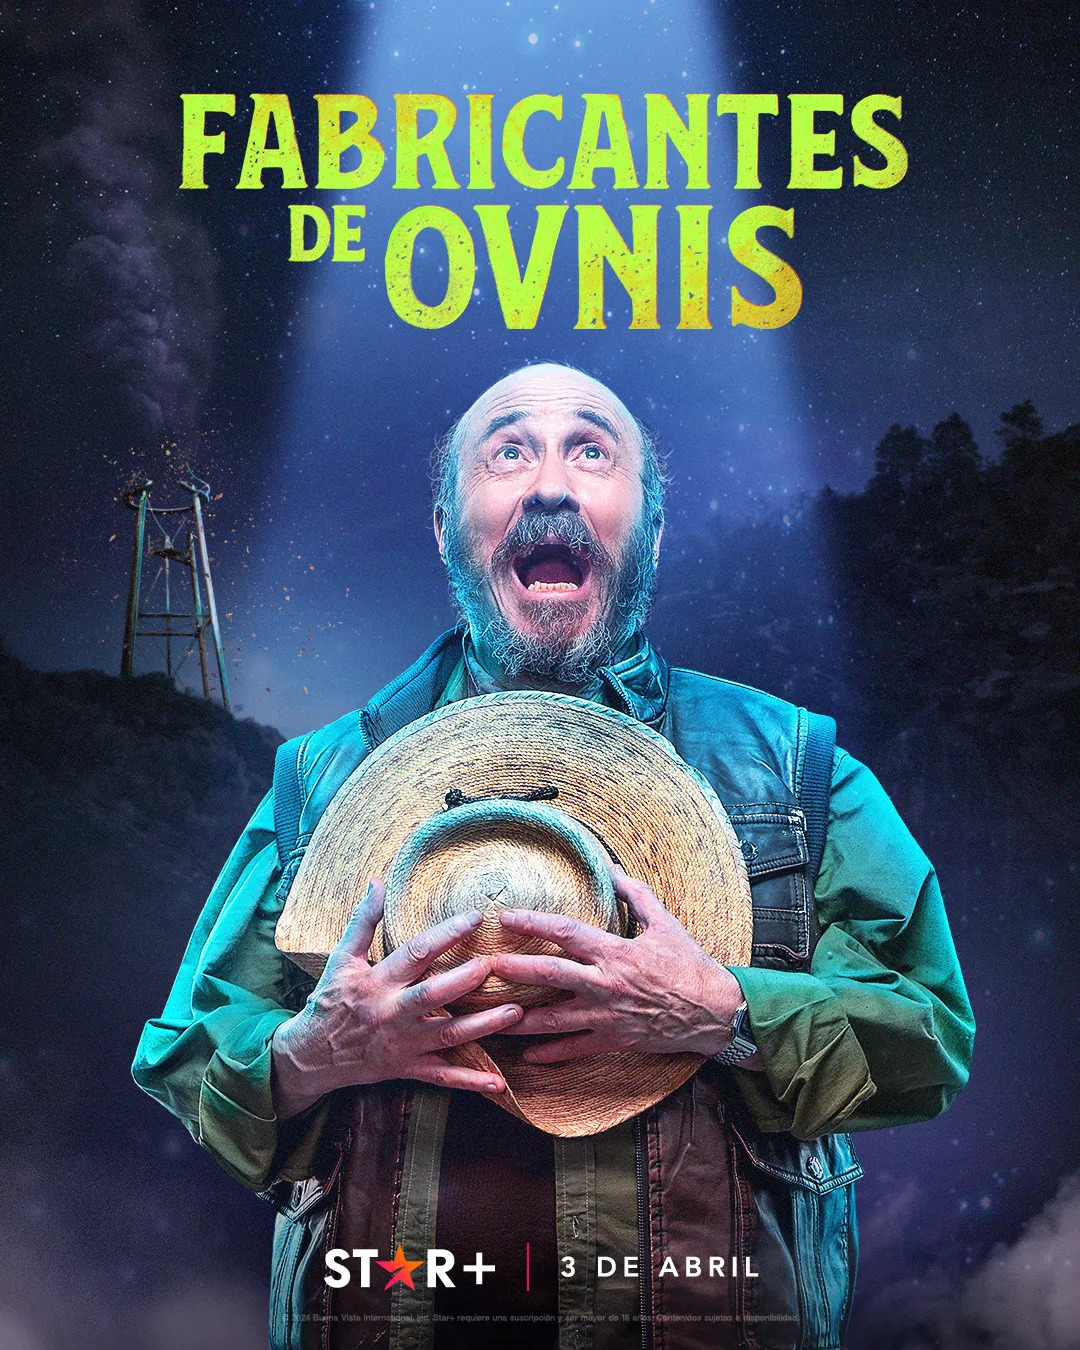 Extra Large TV Poster Image for Fabricante de ovnis (#8 of 11)